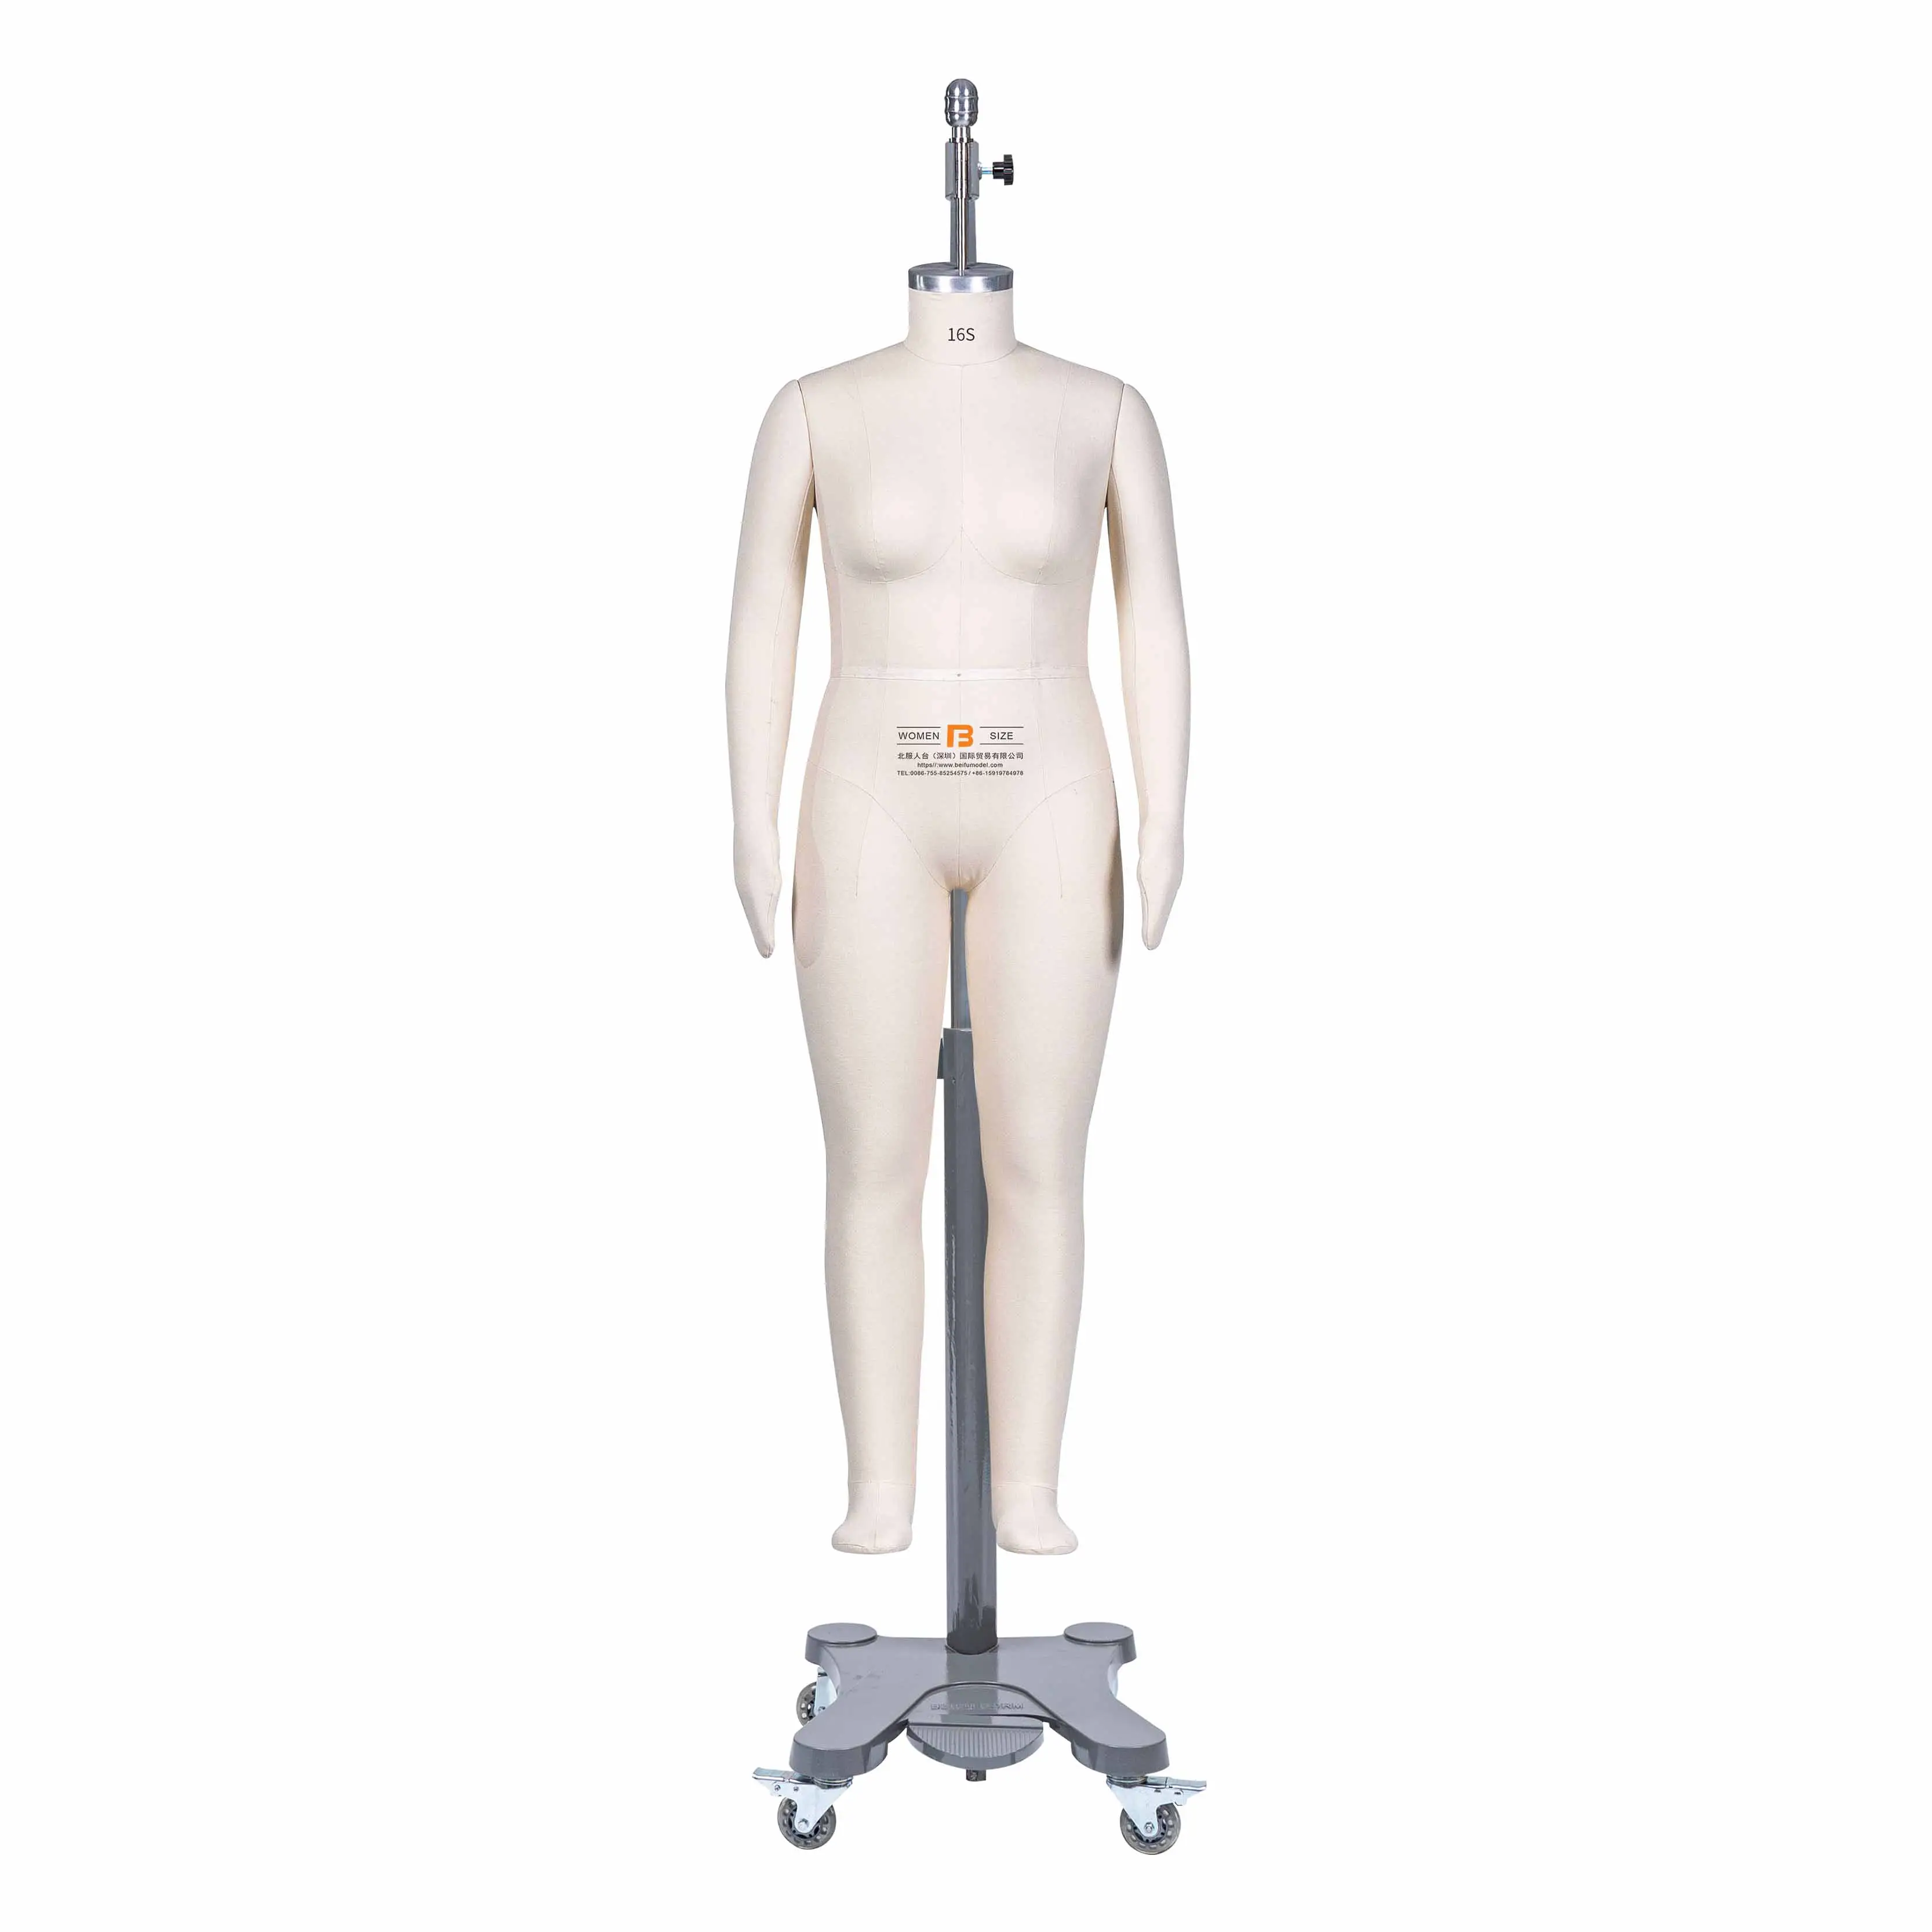 Beifuform tailor hanging full body mannequin US size 16S female model with hands and feet for sell manikin dressmaker